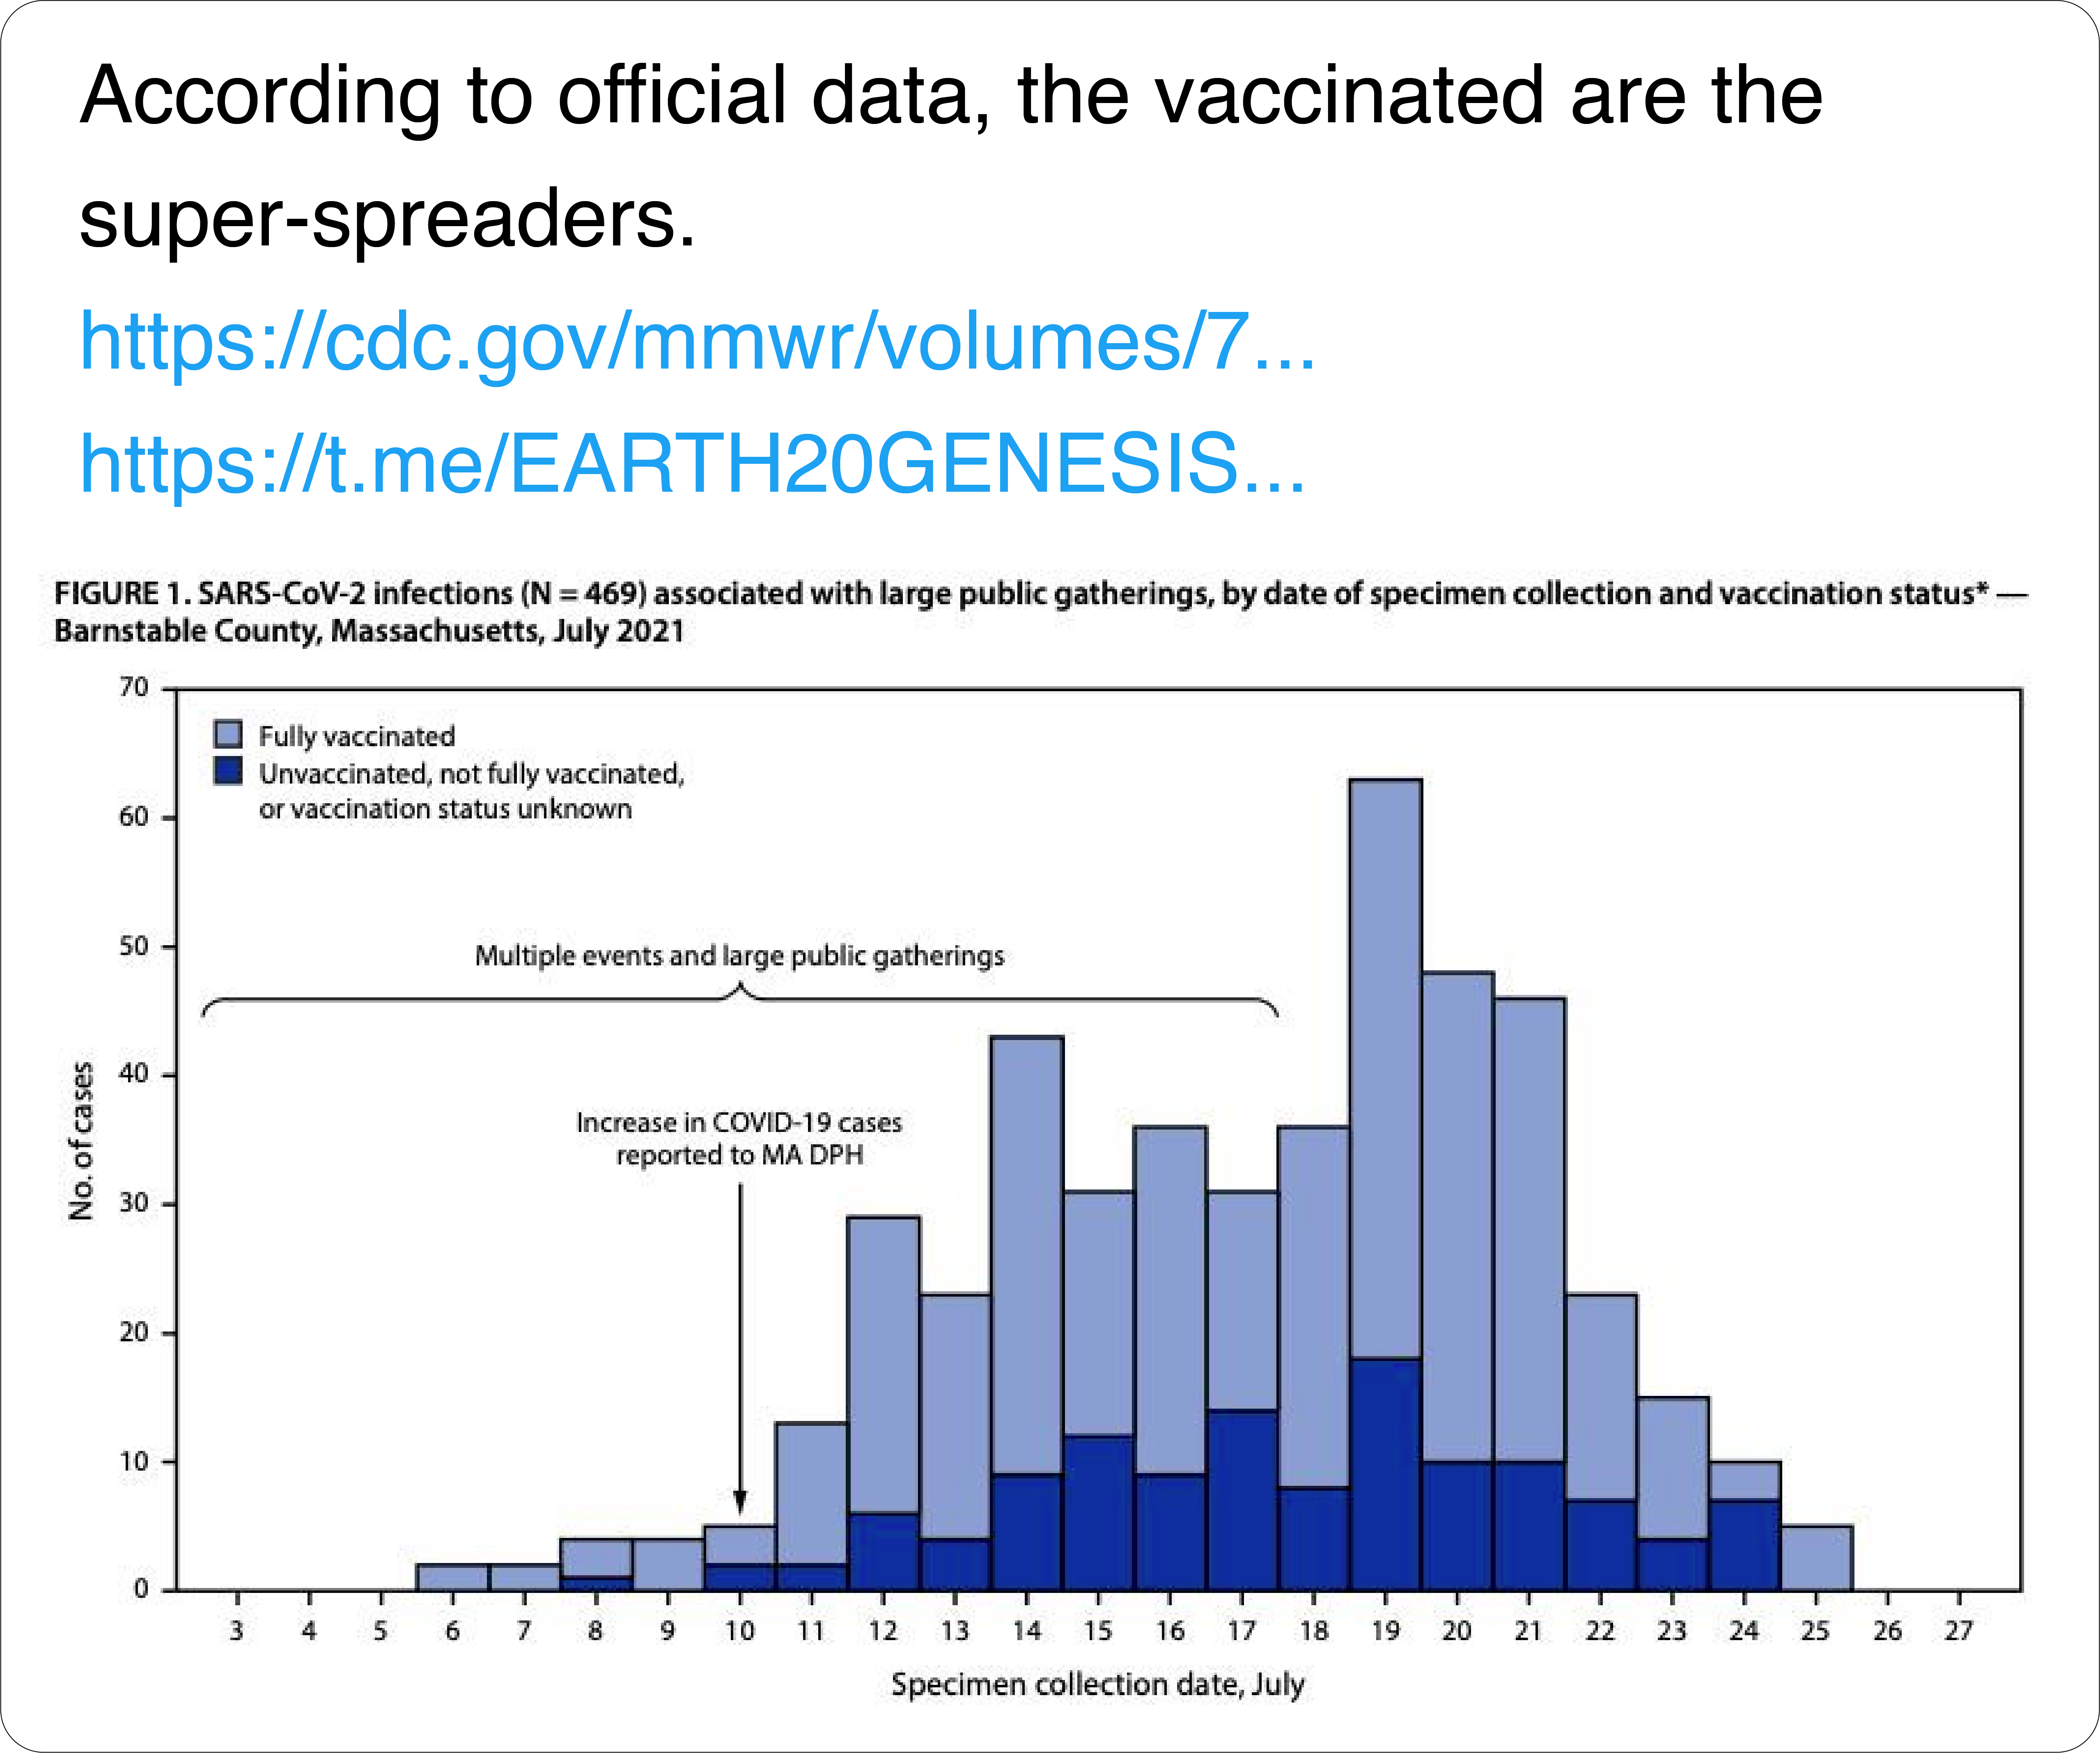 Screenshot of a tweet.  
The caption says: According to official data, the vaccinated are the super-spreaders, and links to the CDC website. The attached chart is a stacked bar chart of Covid cases over time, color-coded to represent vaccinated and unvaccinated cases. The vaccinated part of the bars is consistently larger.
